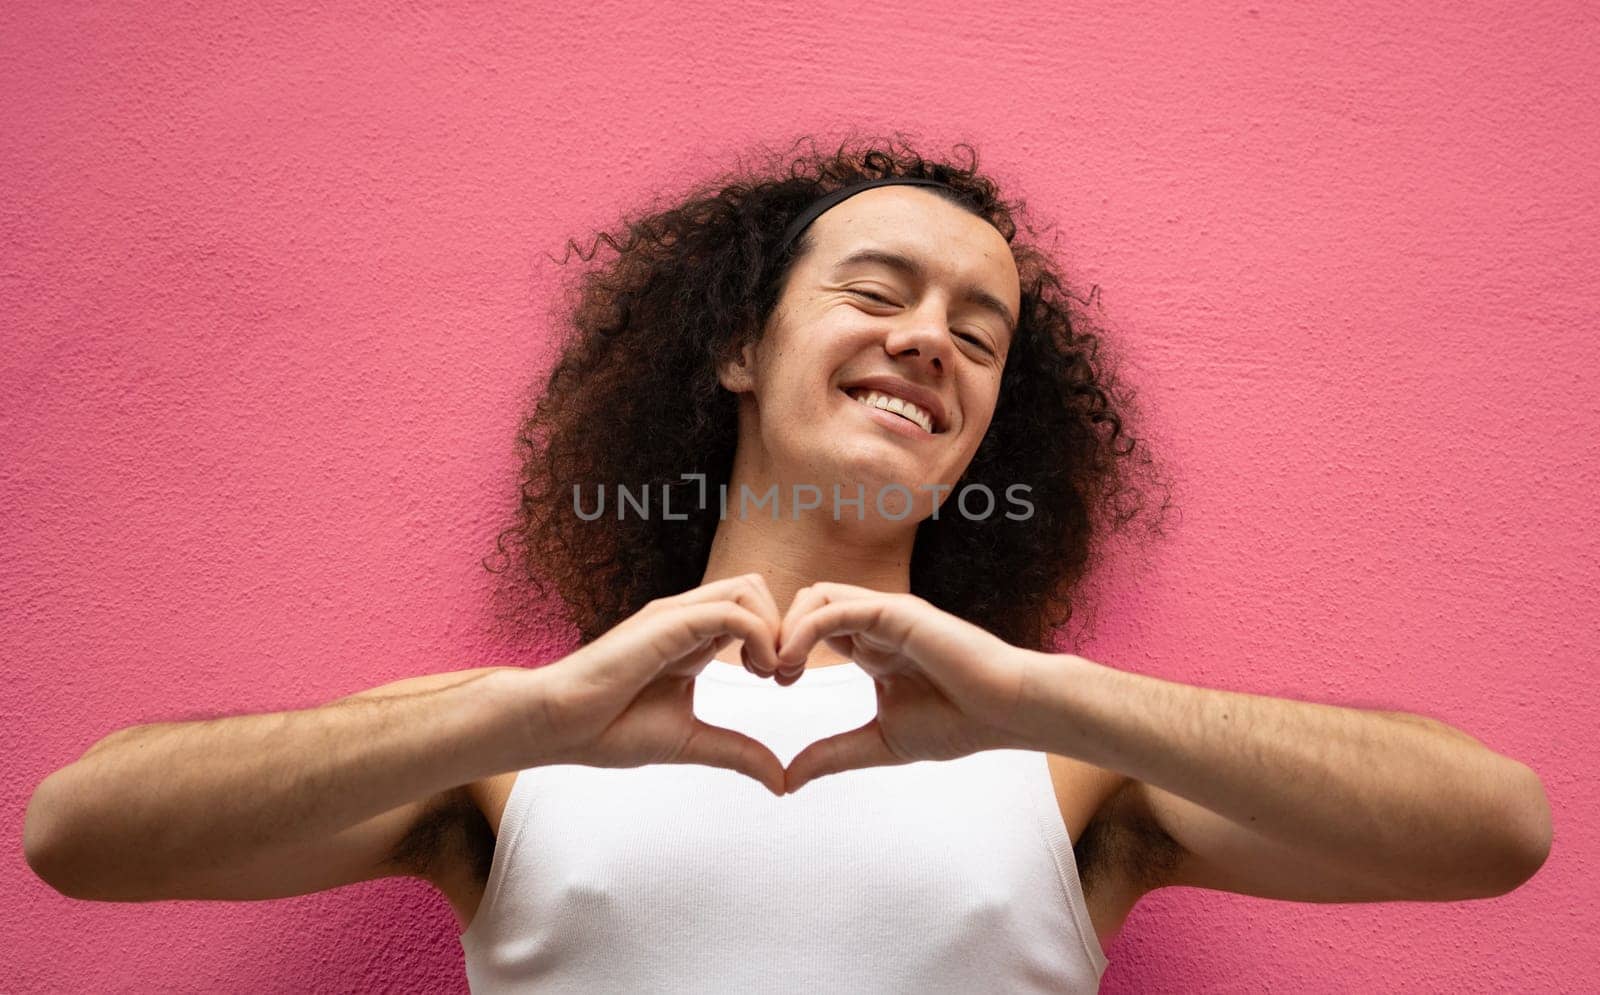 Gay man with curly hair is smiling and making a heart shape with his hands isolated on pink background by papatonic